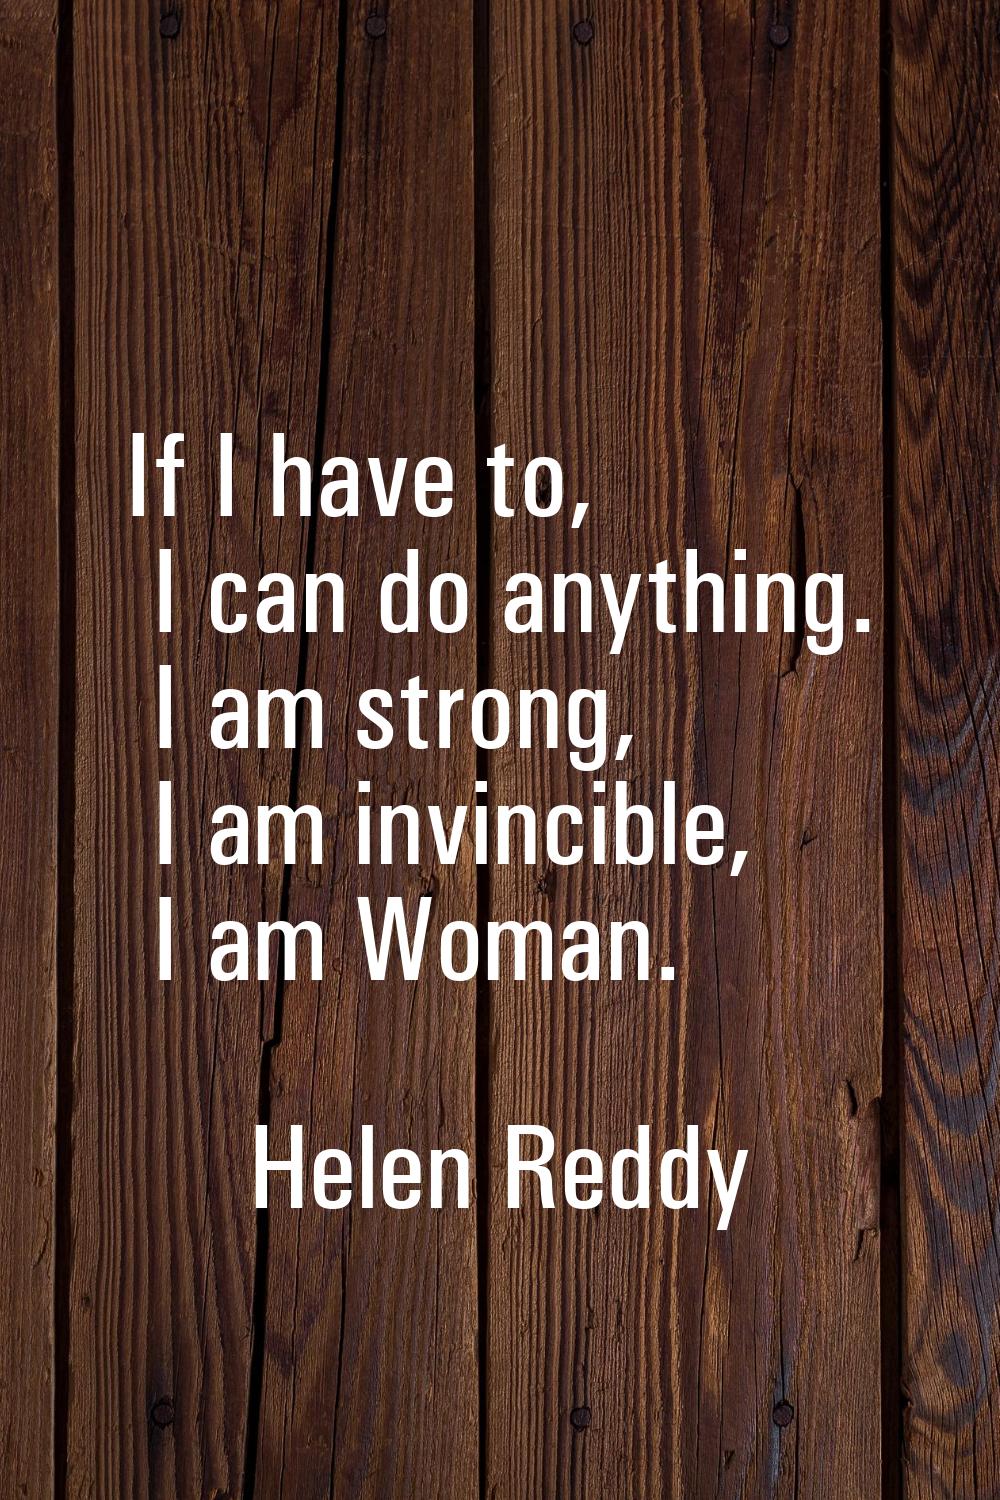 If I have to, I can do anything. I am strong, I am invincible, I am Woman.